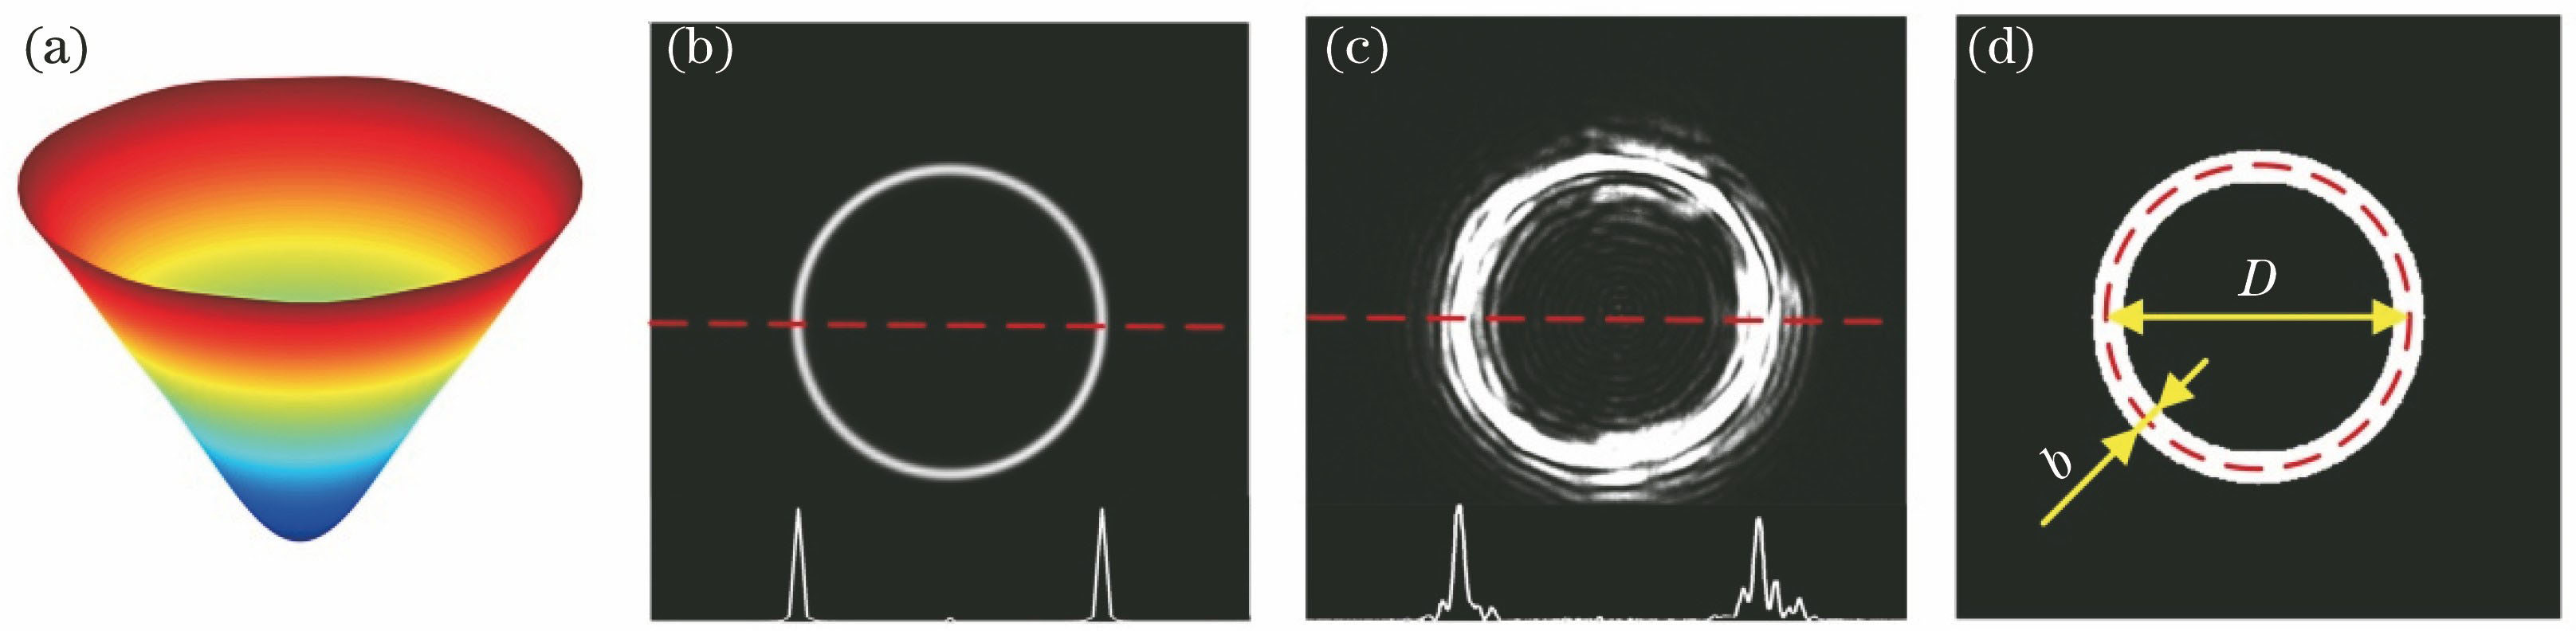 Influence of round tip error of deformable mirror on spatial spectrum of generated Bessel beams. (a) Conical wavefront generated by deformable mirror; (b) (c) light intensity distributions on spectrum plane of Bessel beams generated by ideal axicon and practical deformable mirror, respectively; (d) designed spatial filter